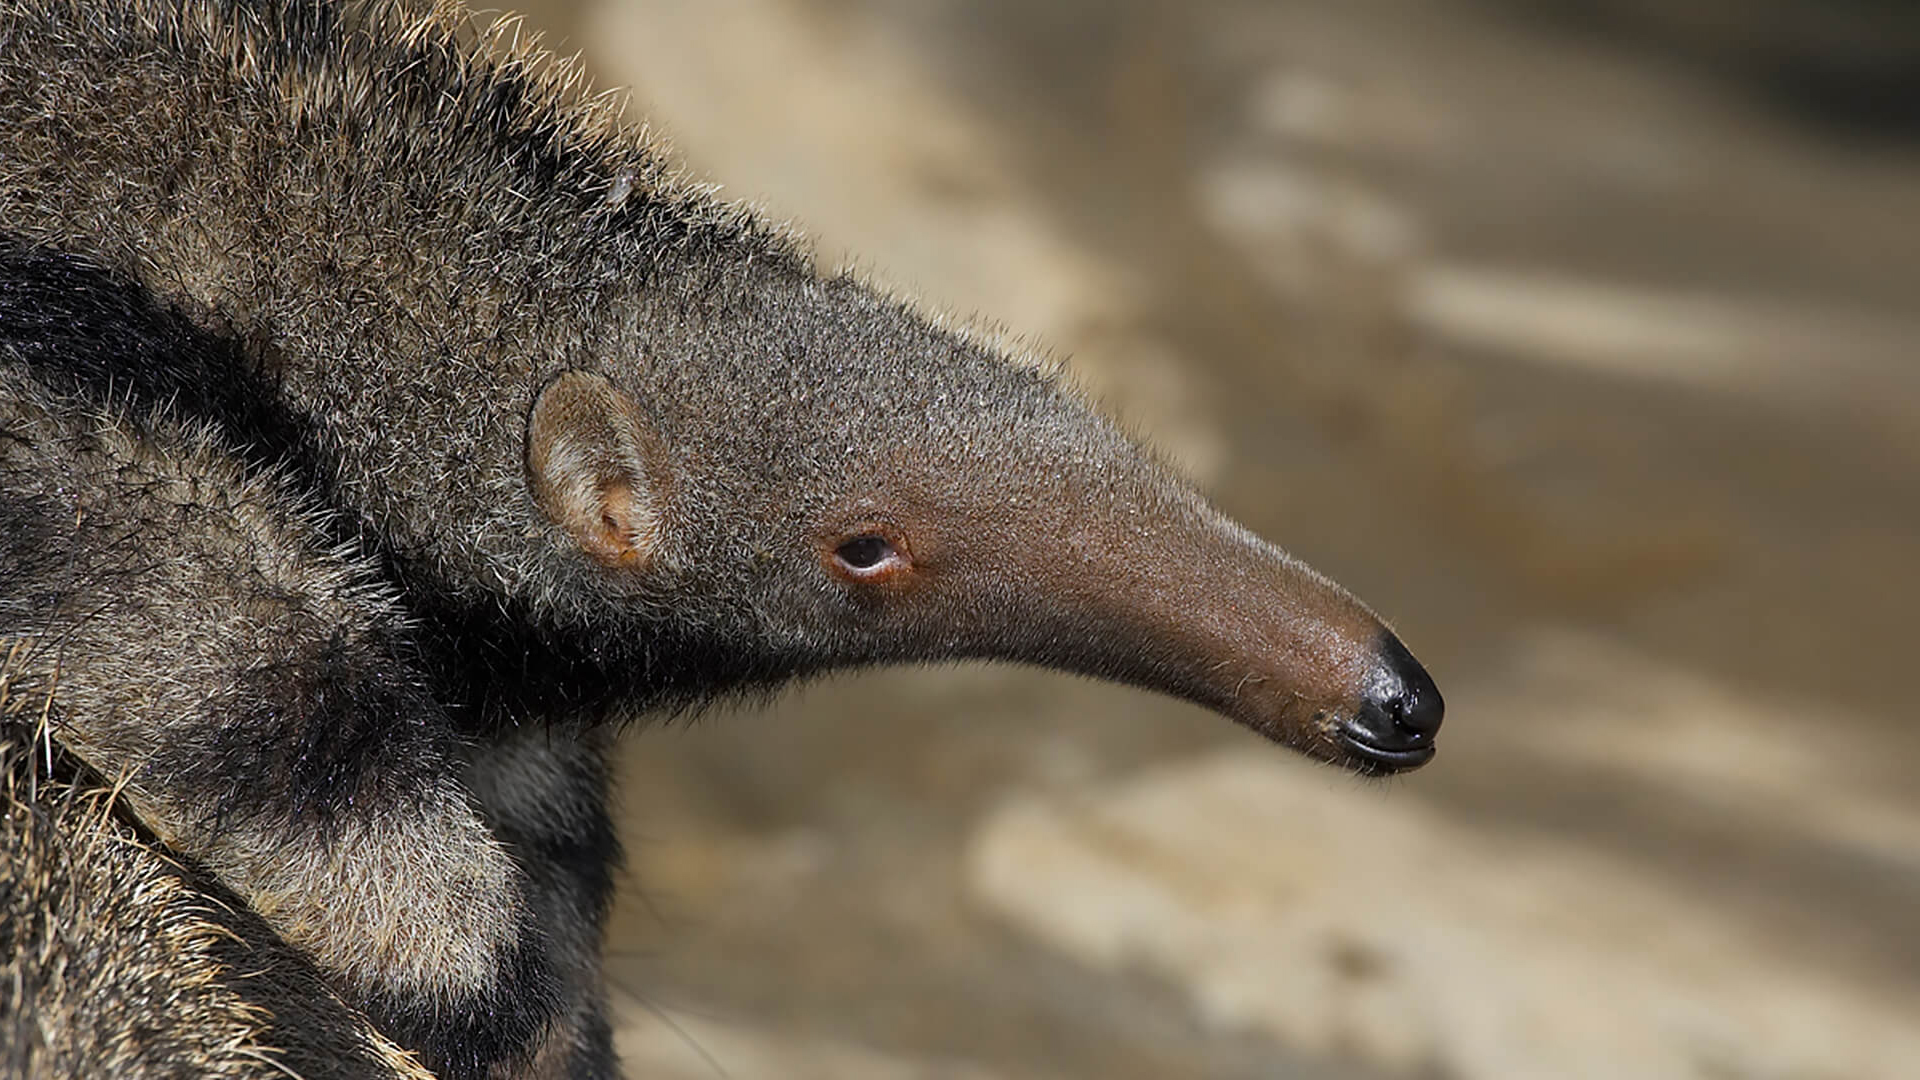 A baby giant anteater rides on its mother's back